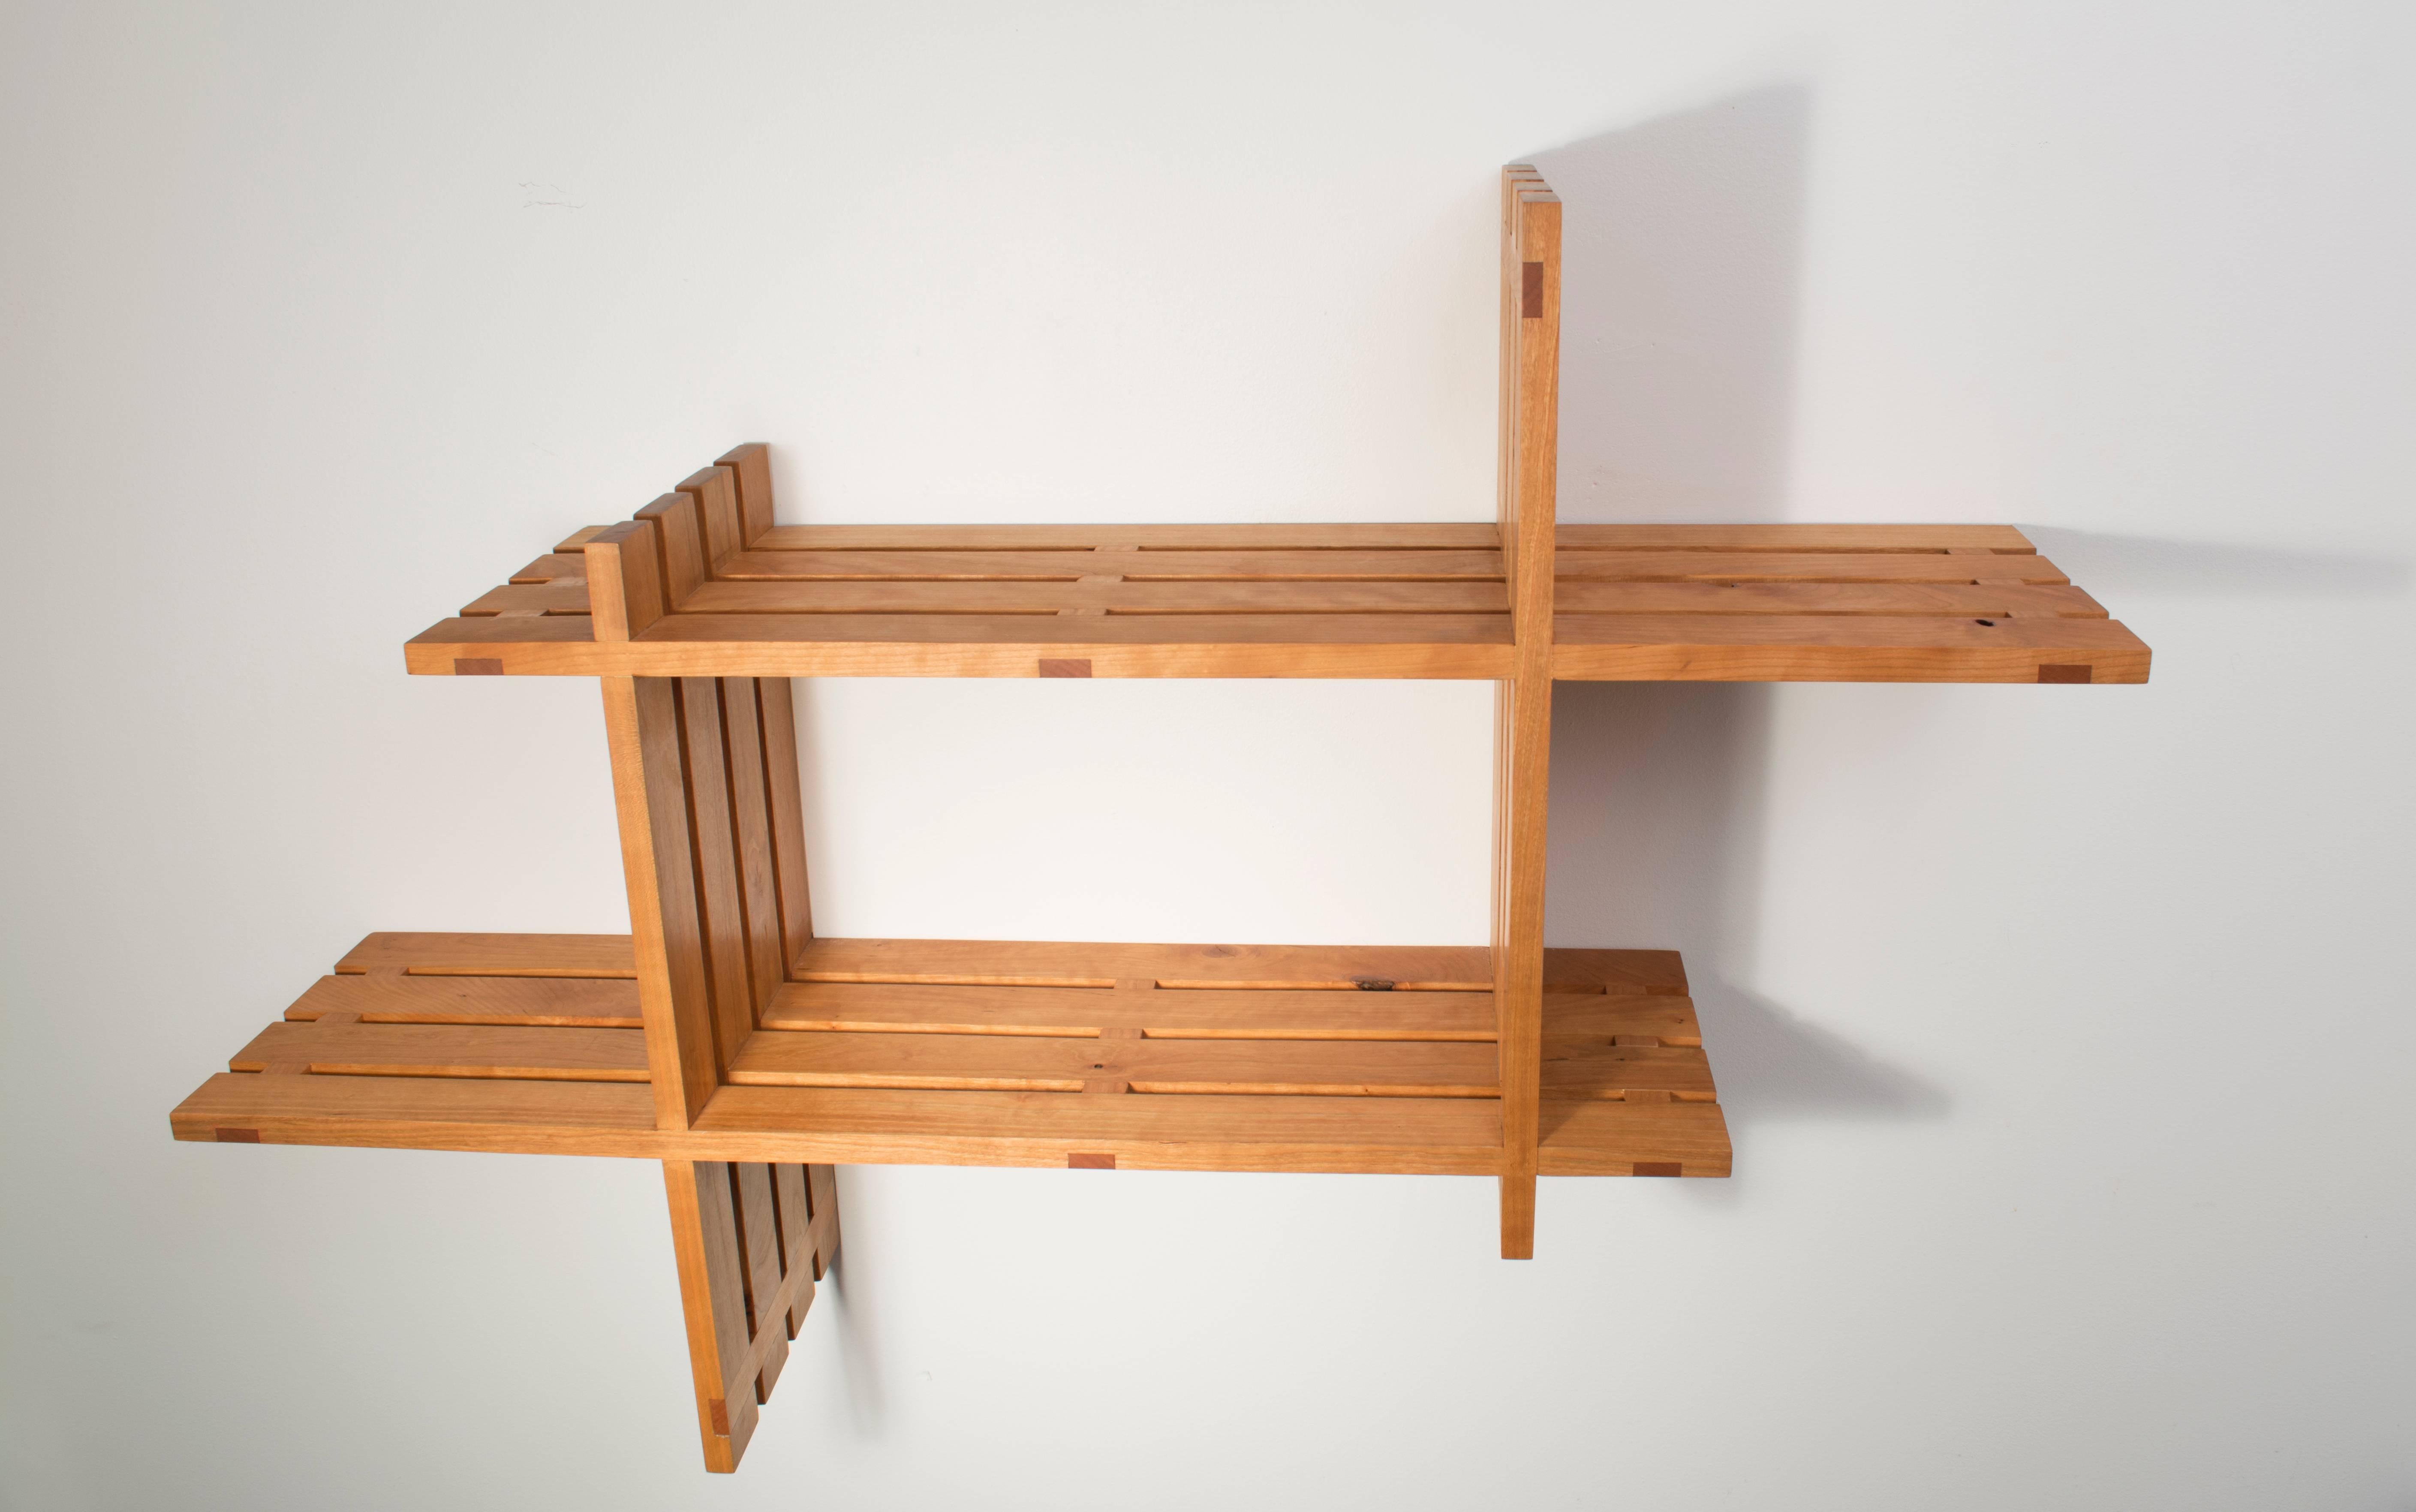 Measurements of pictured version: 42 x 11 x 28 inches (L x D x H).
These solid cherry shelves are made by hand with traditional wood joinery.
The version pictured has 48 wood joints, adding complexity and strength to the piece. All wood is